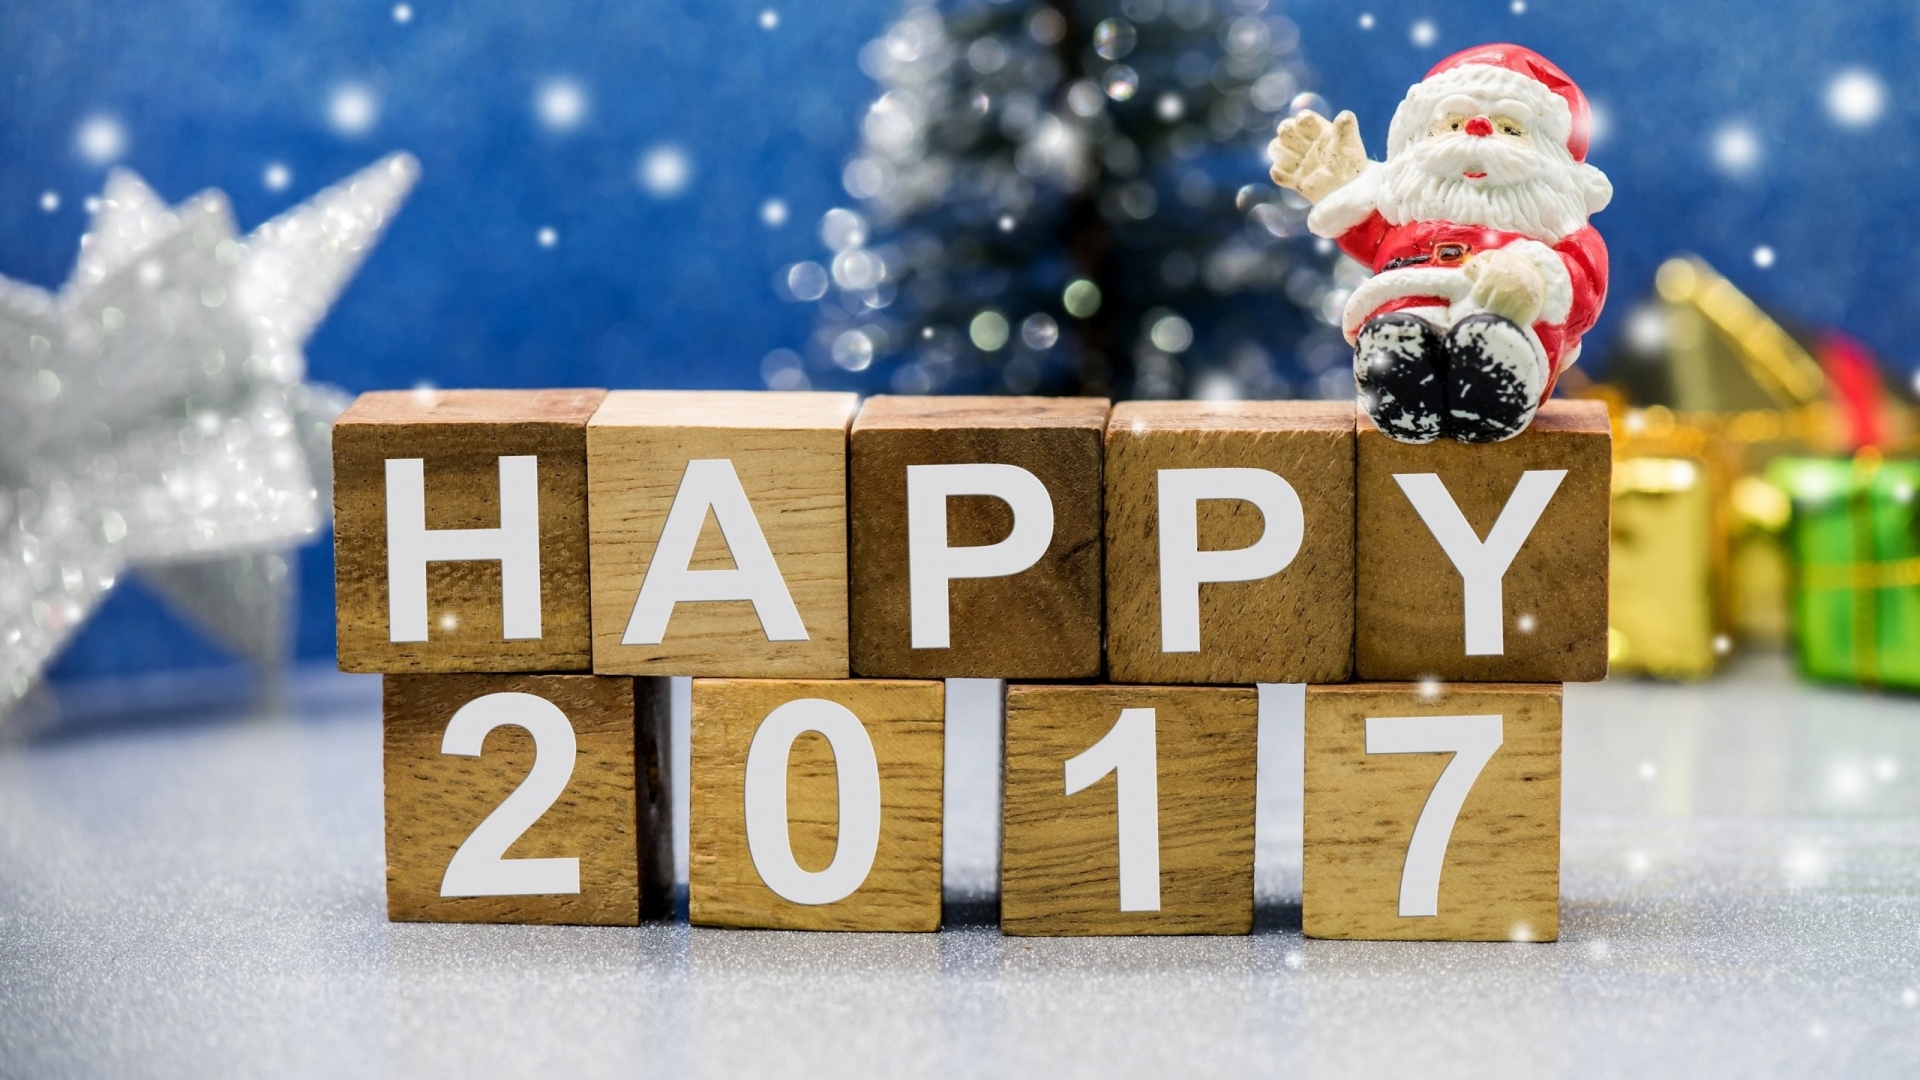 Happy New Year 2017 for 1920 x 1080 HDTV 1080p resolution